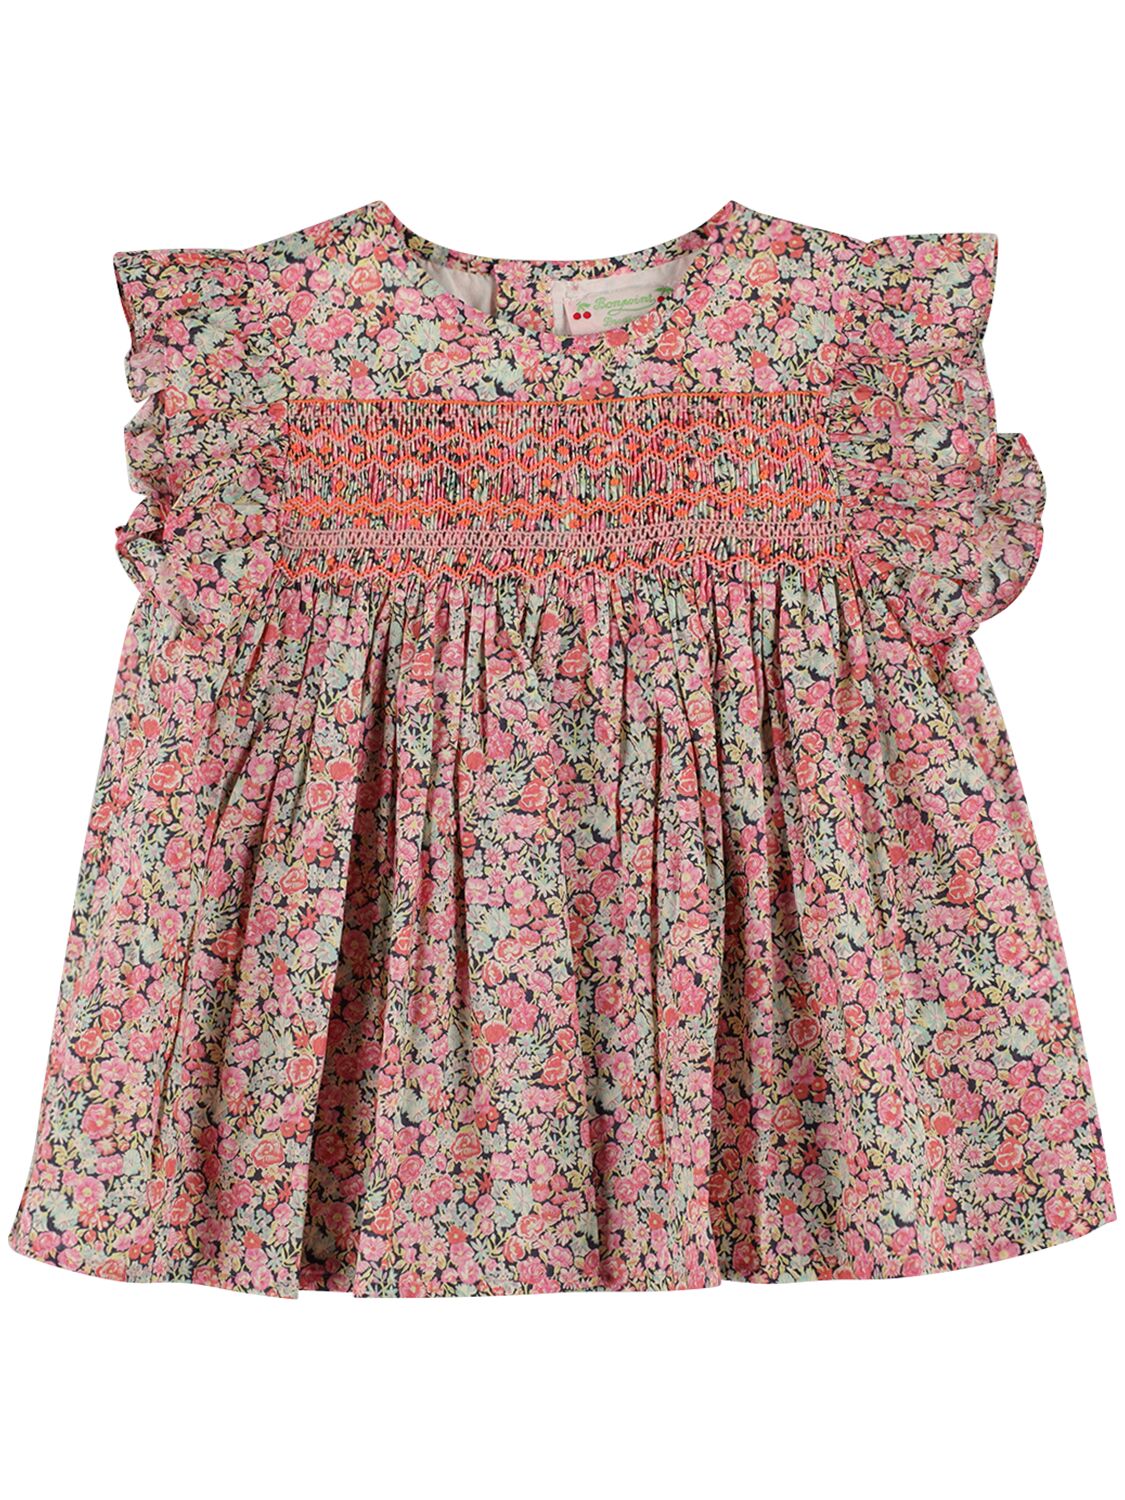 Bonpoint Kids' Printed Cotton Blouse W/ Embroidery In 멀티컬러